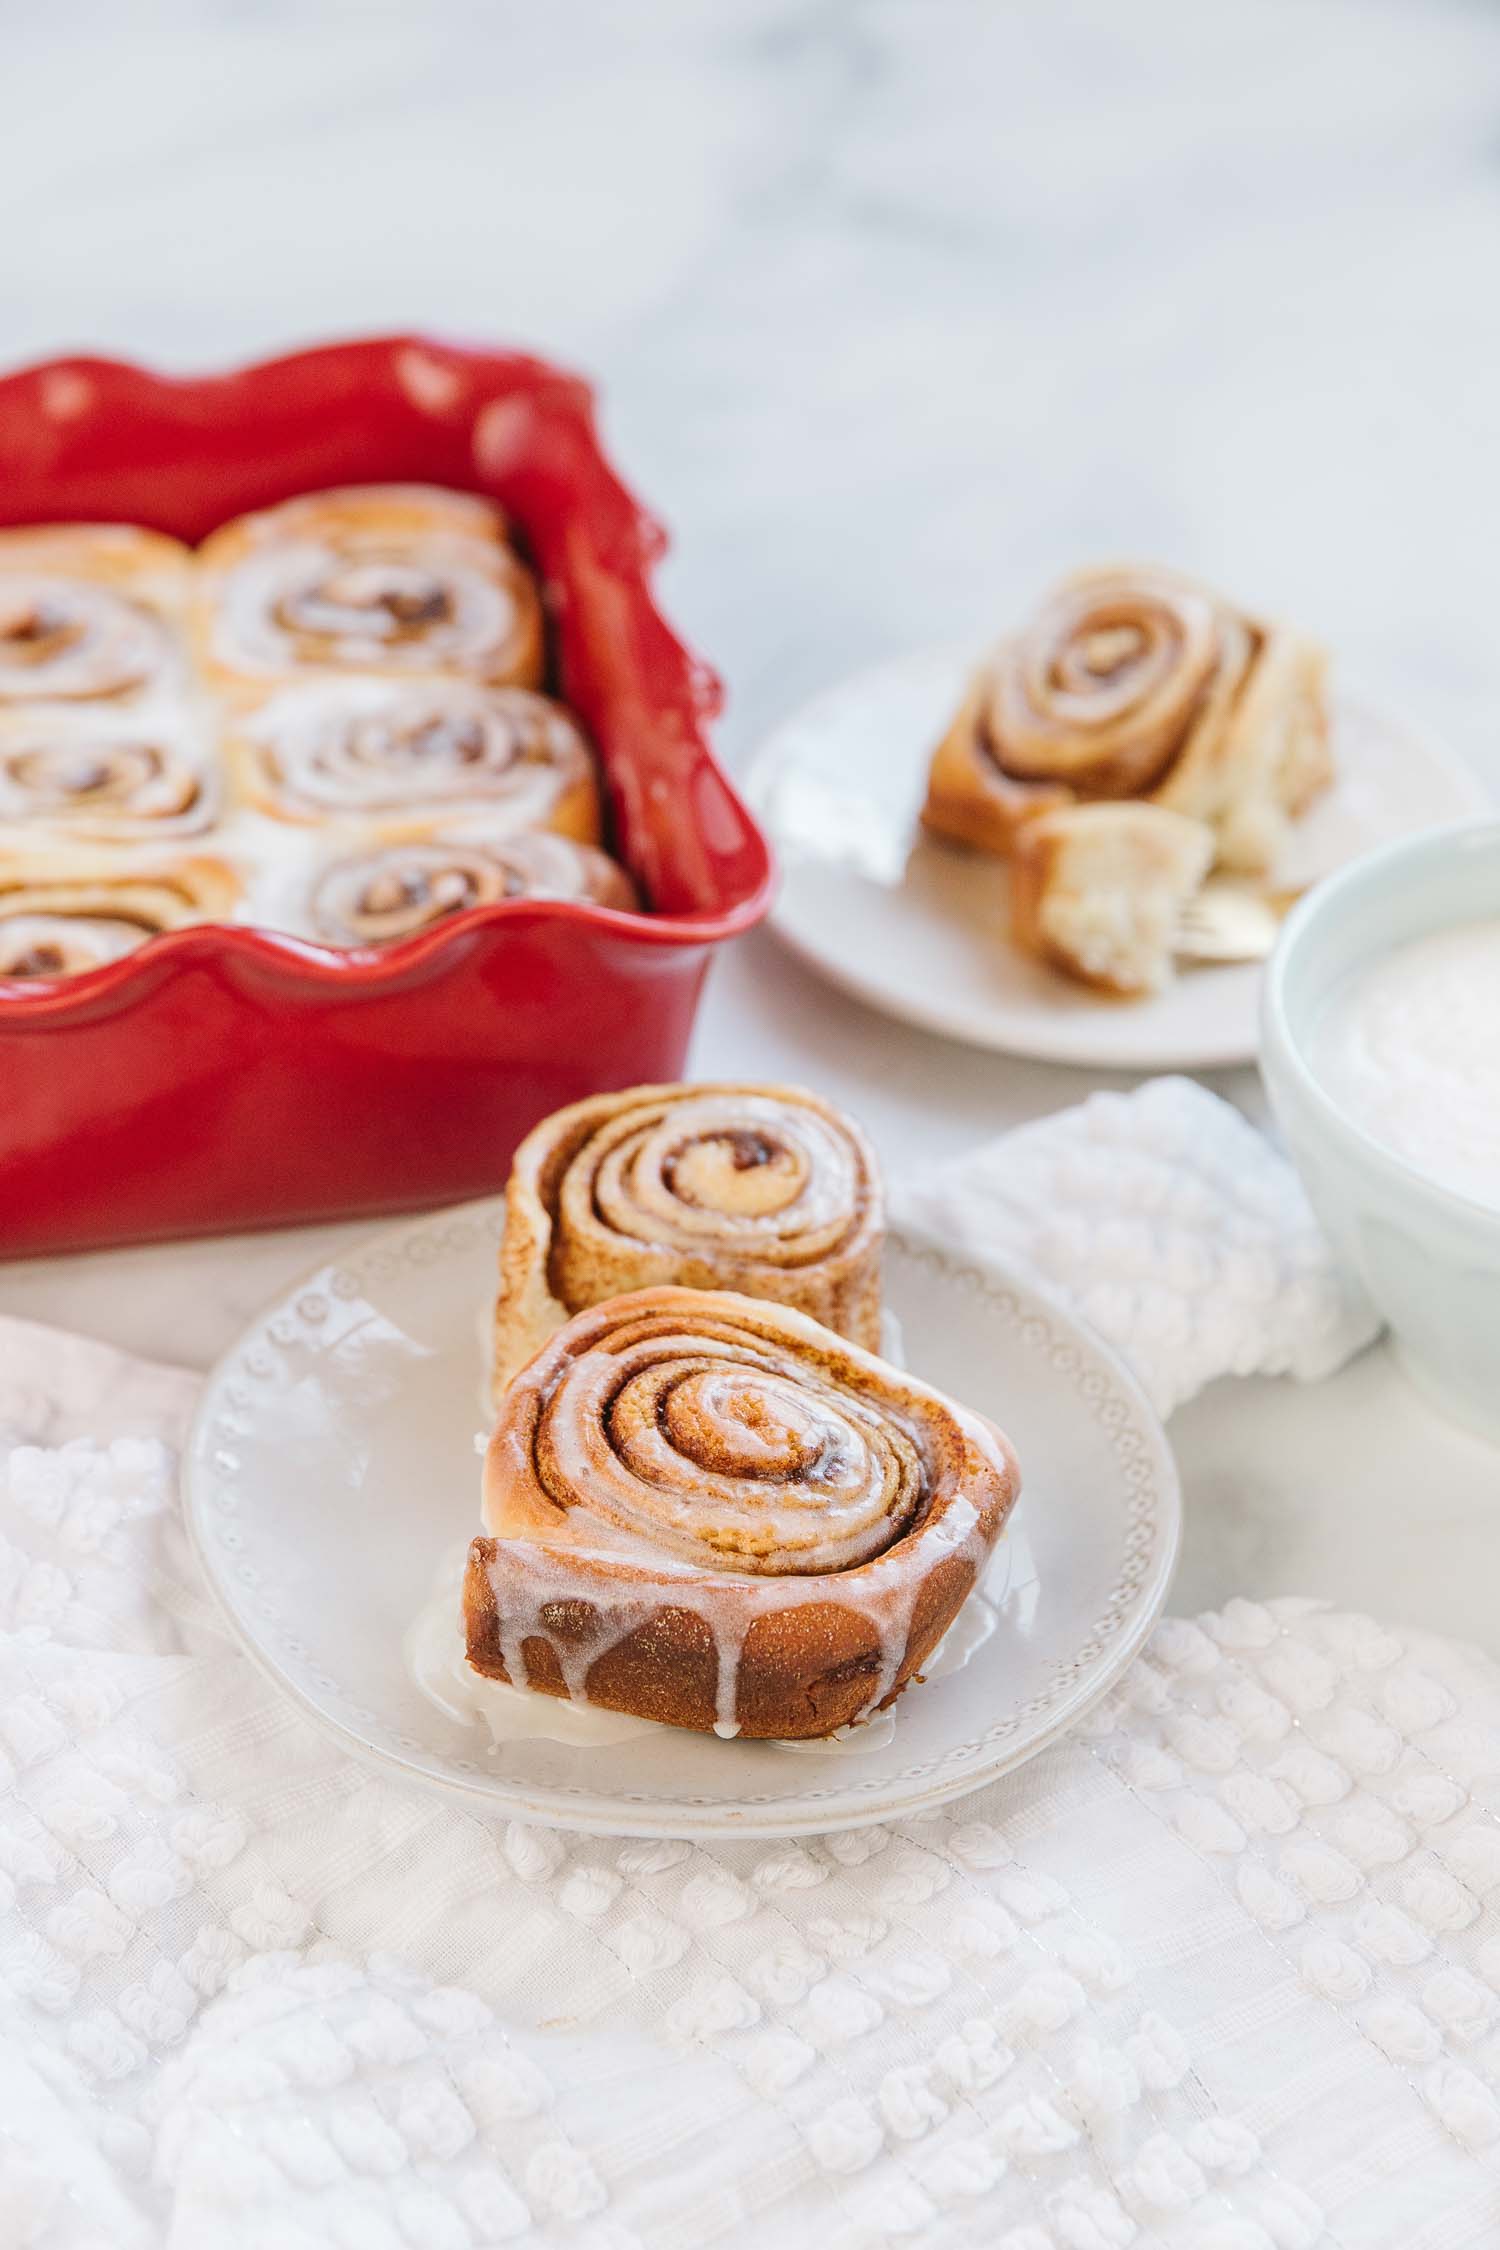 A white plate with two cinnamon rolls with a white bowl of vanilla icing, a white plate with a cinnamon roll and a red pan of other cinnamon rolls.